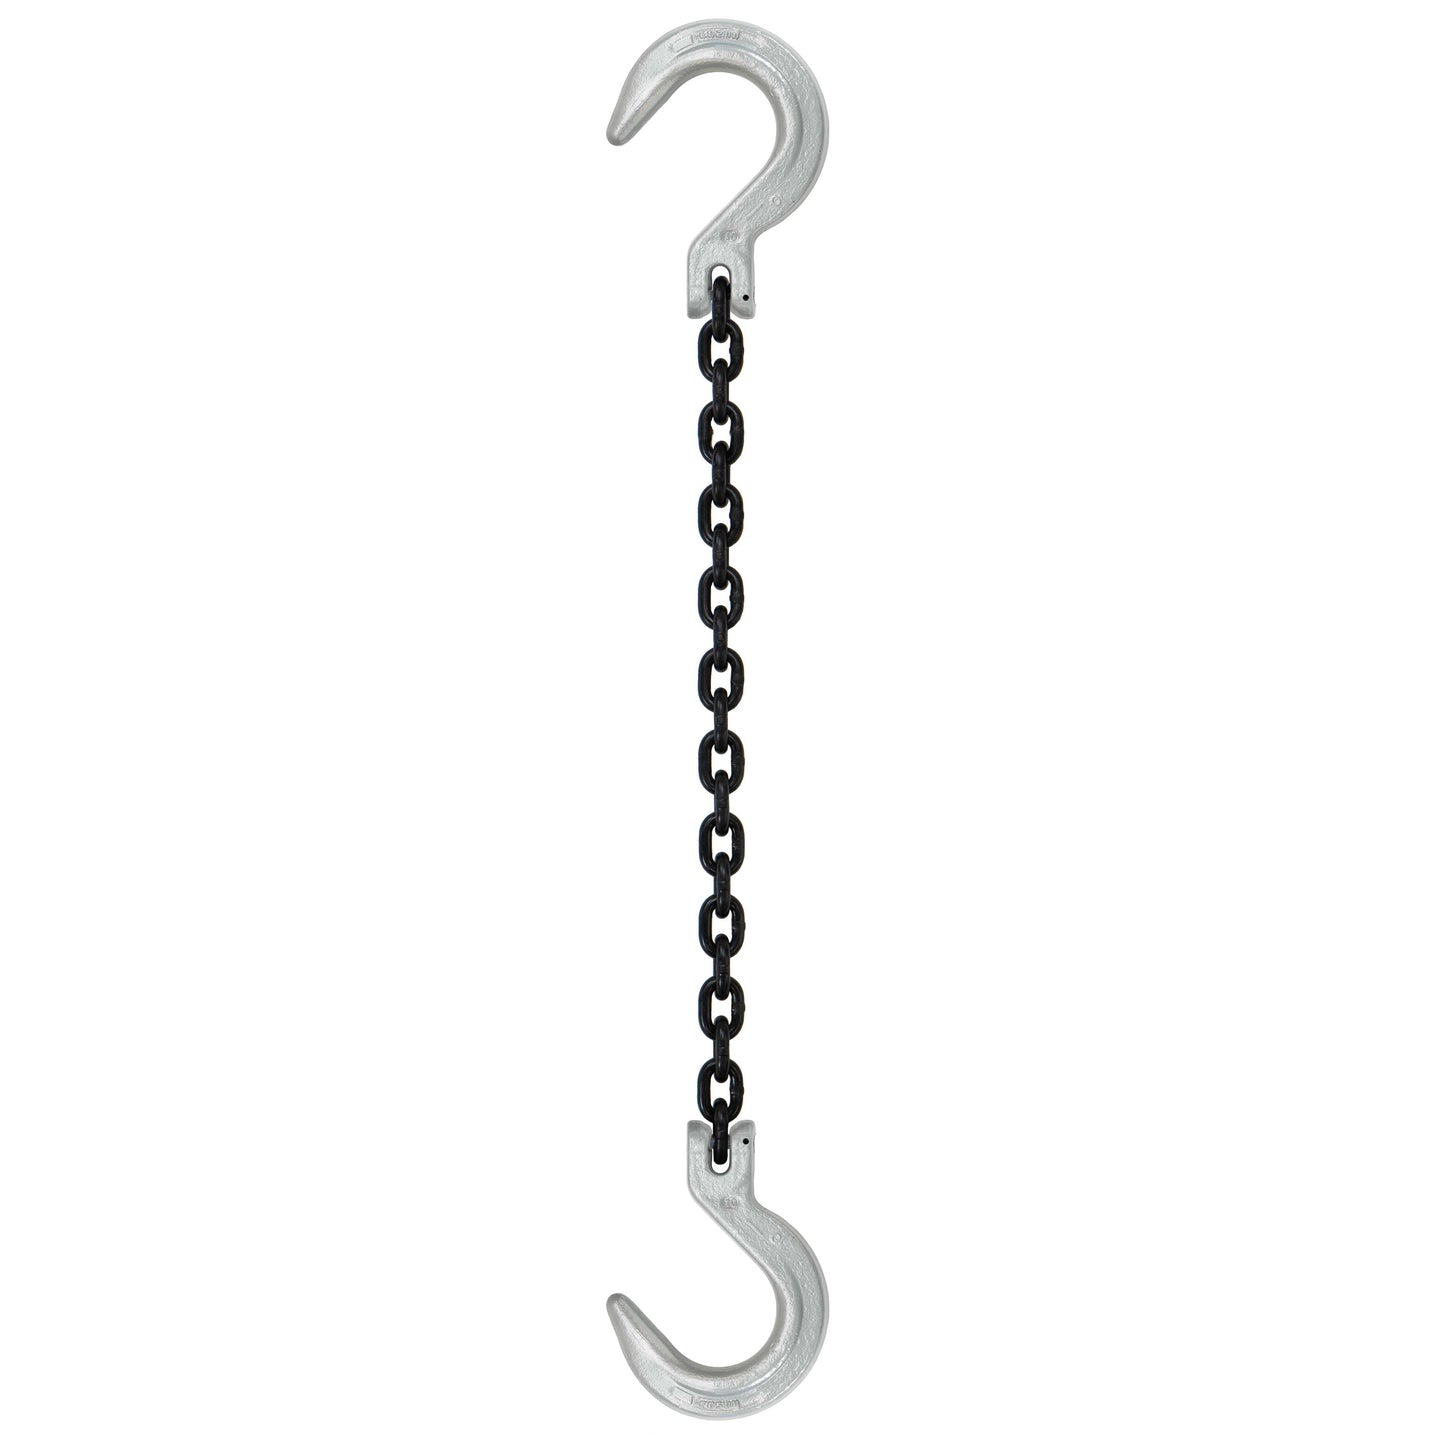 516 inch x 10 foot Domestic Single Leg Chain Sling w Crosby Foundry & Foundry Hooks Grade 100 image 1 of 2